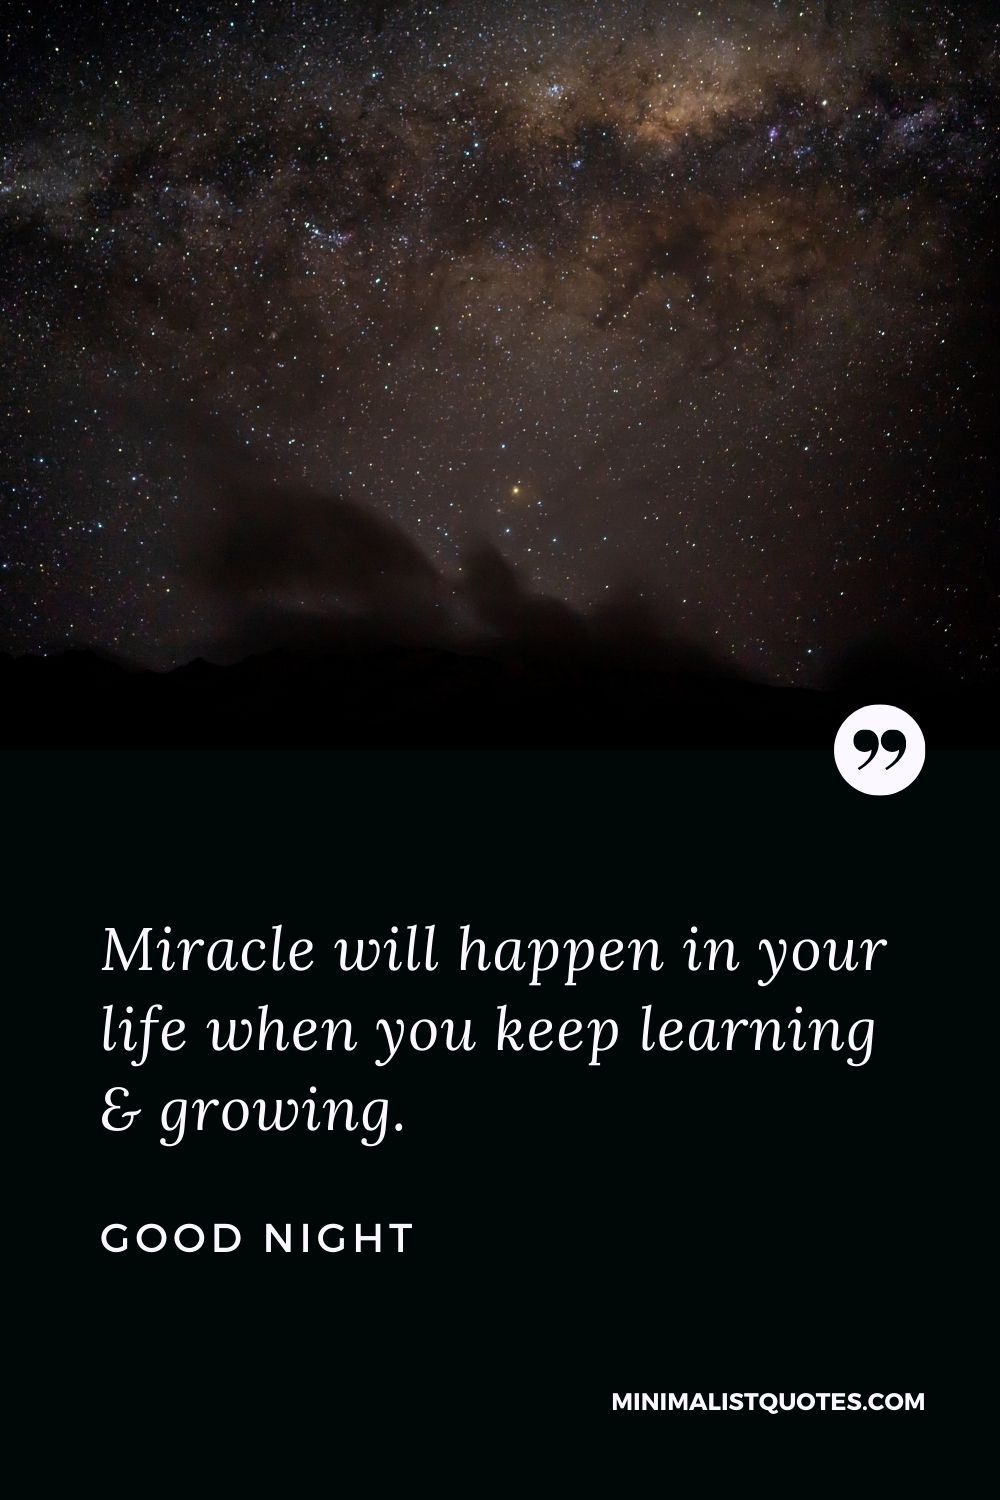 Good Night Wishes - Miracle will happen in your life when you keep learning & growing.